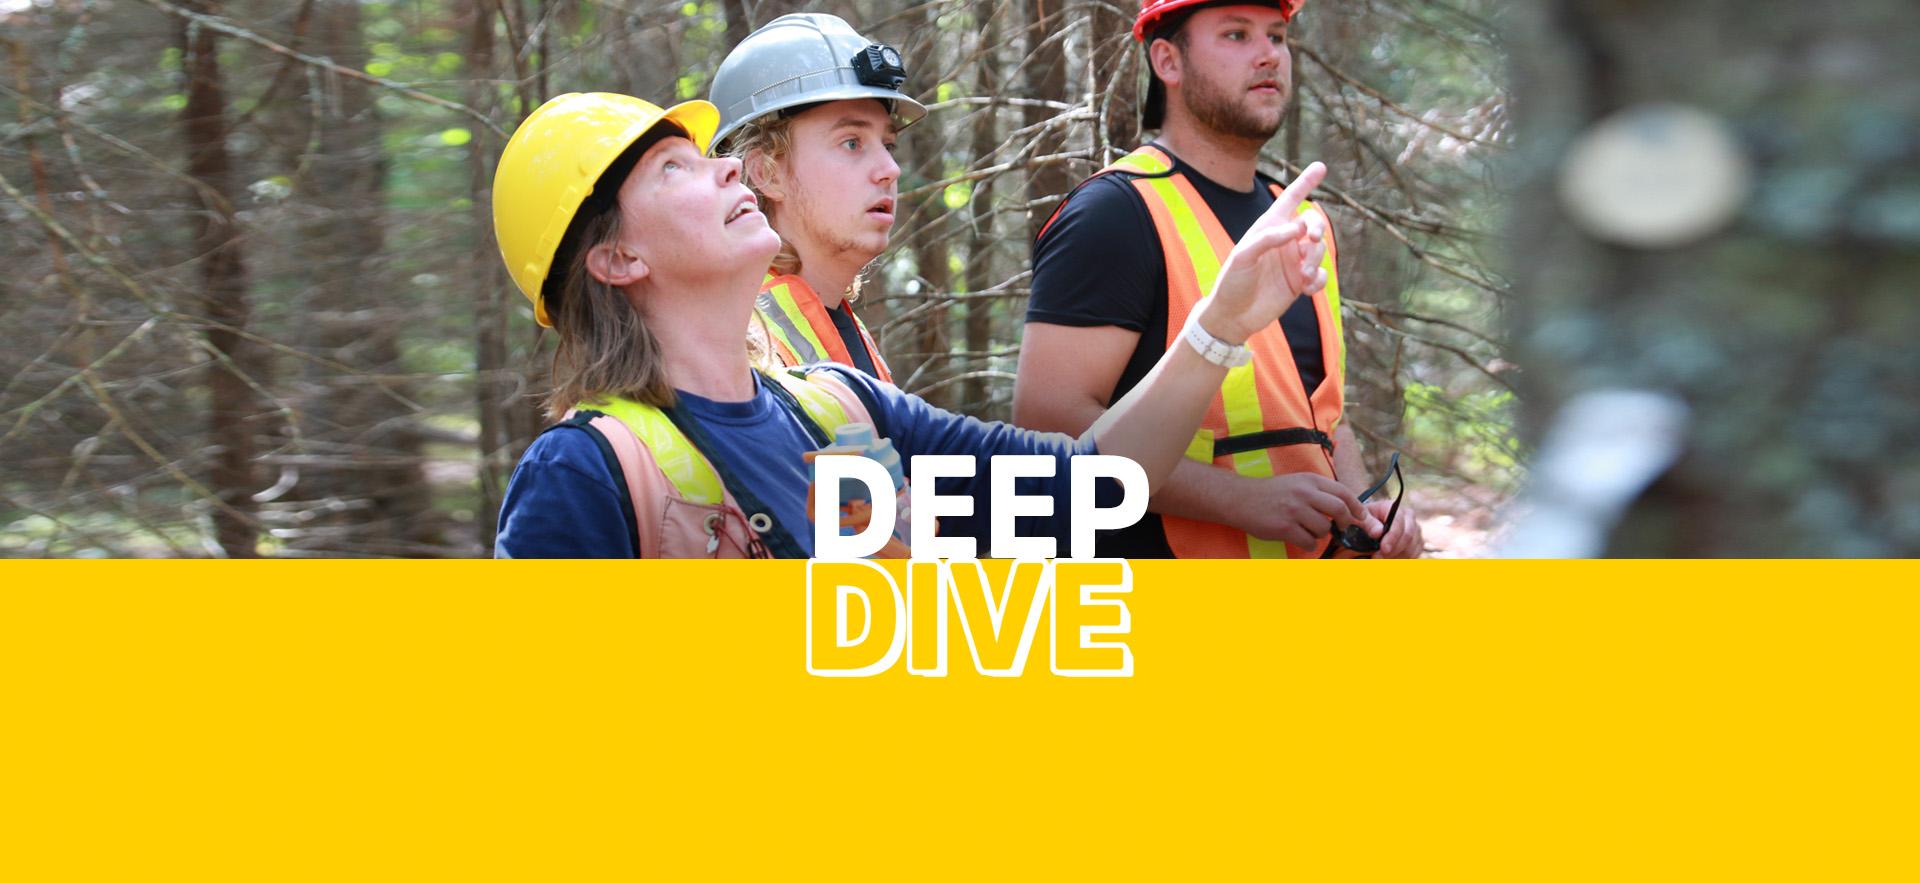 Deep Dive natural environment students during field camp in safety vests and hard hats